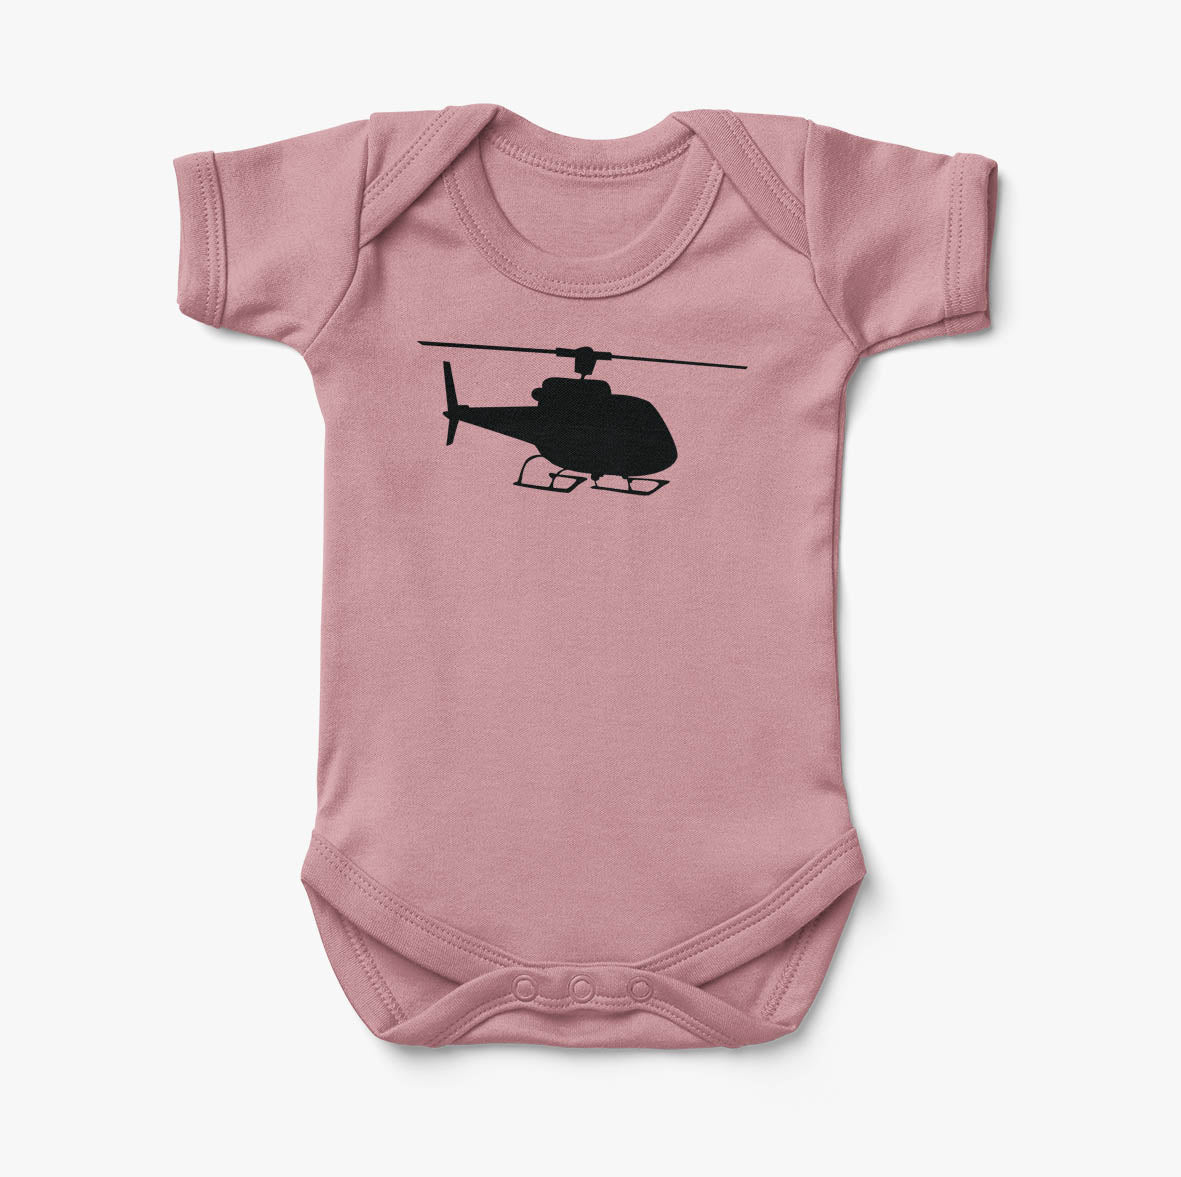 Helicopter Silhouette Designed Baby Bodysuits